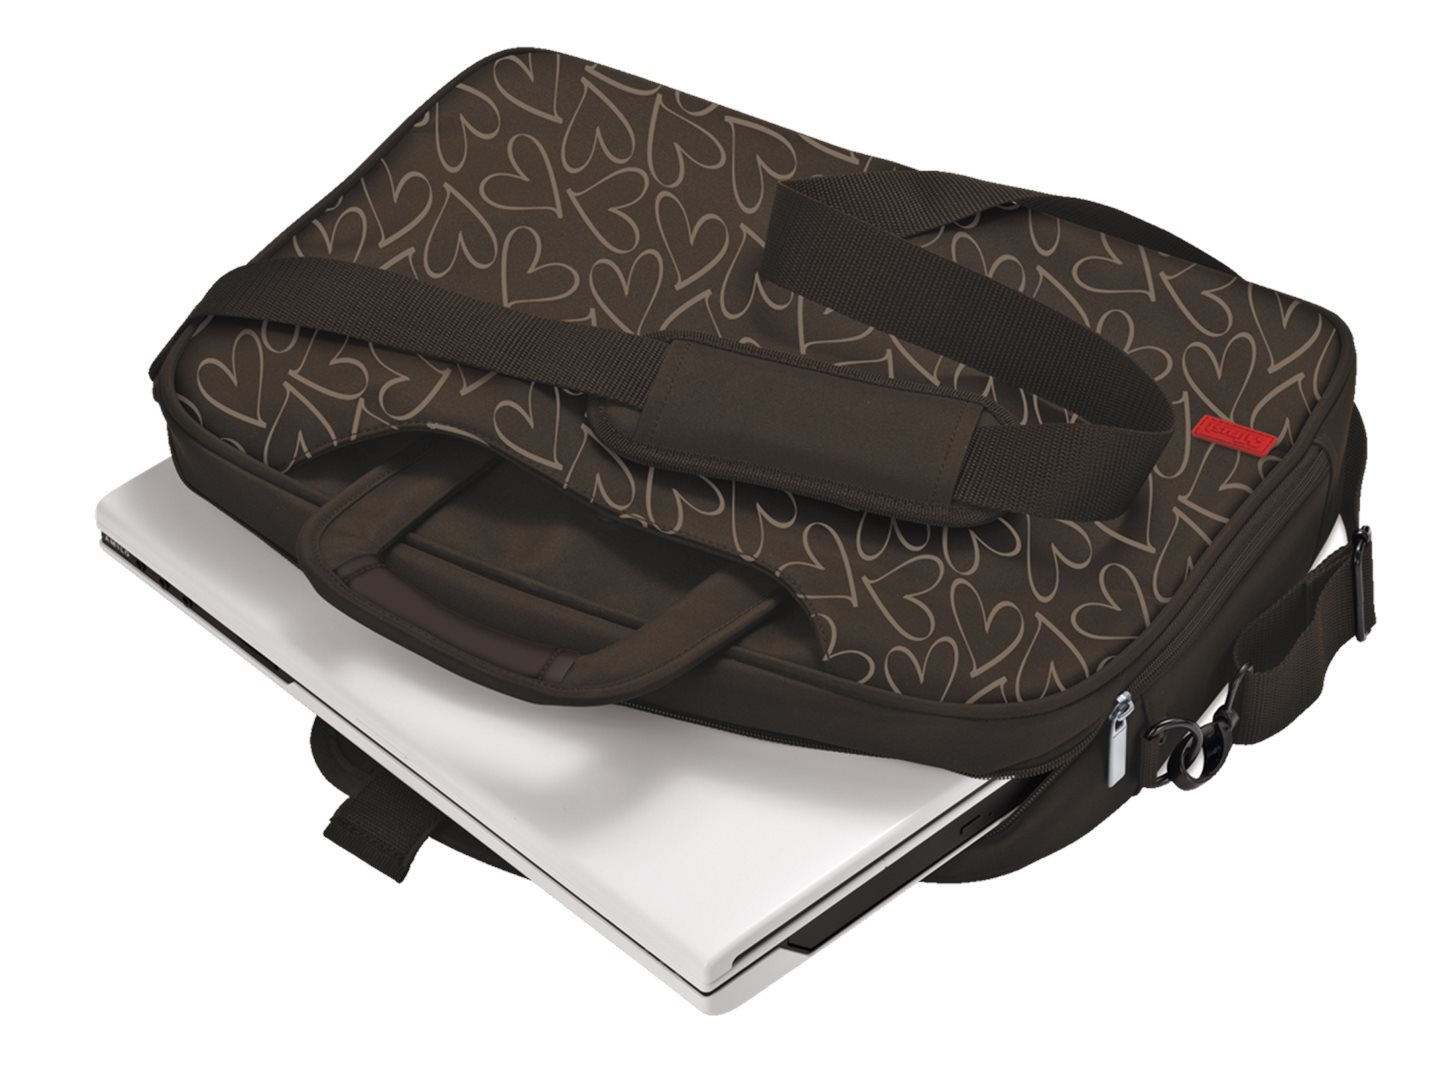 Trust Oslo Carry Bag for 15.6 "laptops - brown